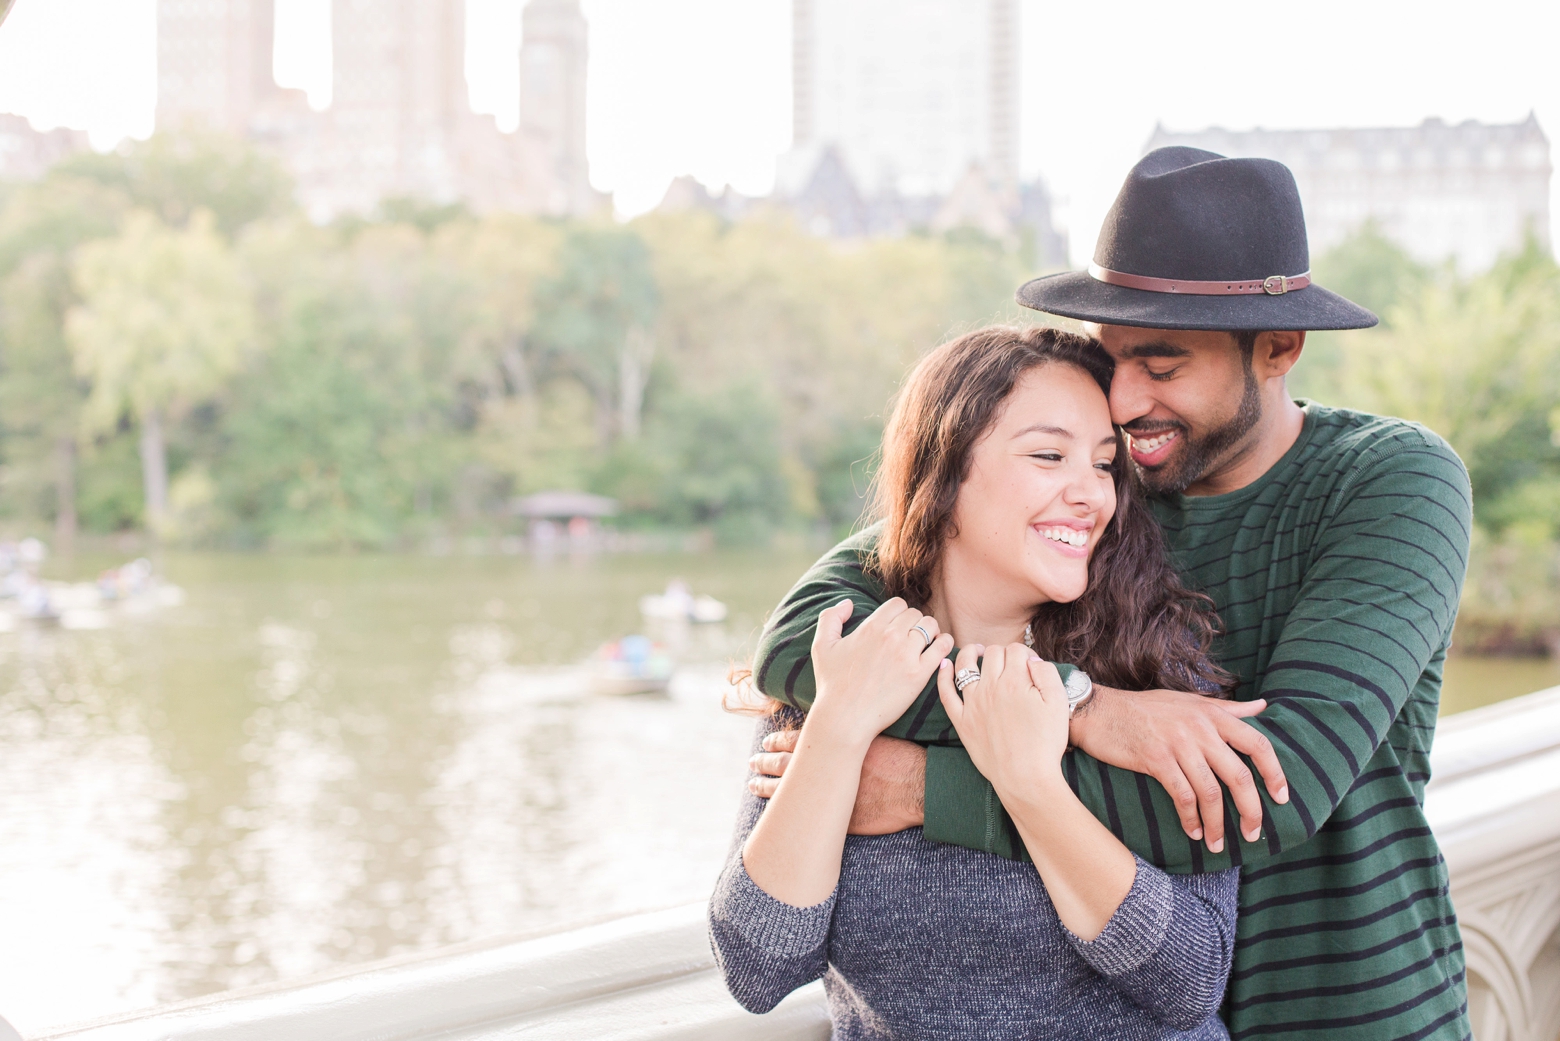 New York Couples Photography by Angie McPherson Photography